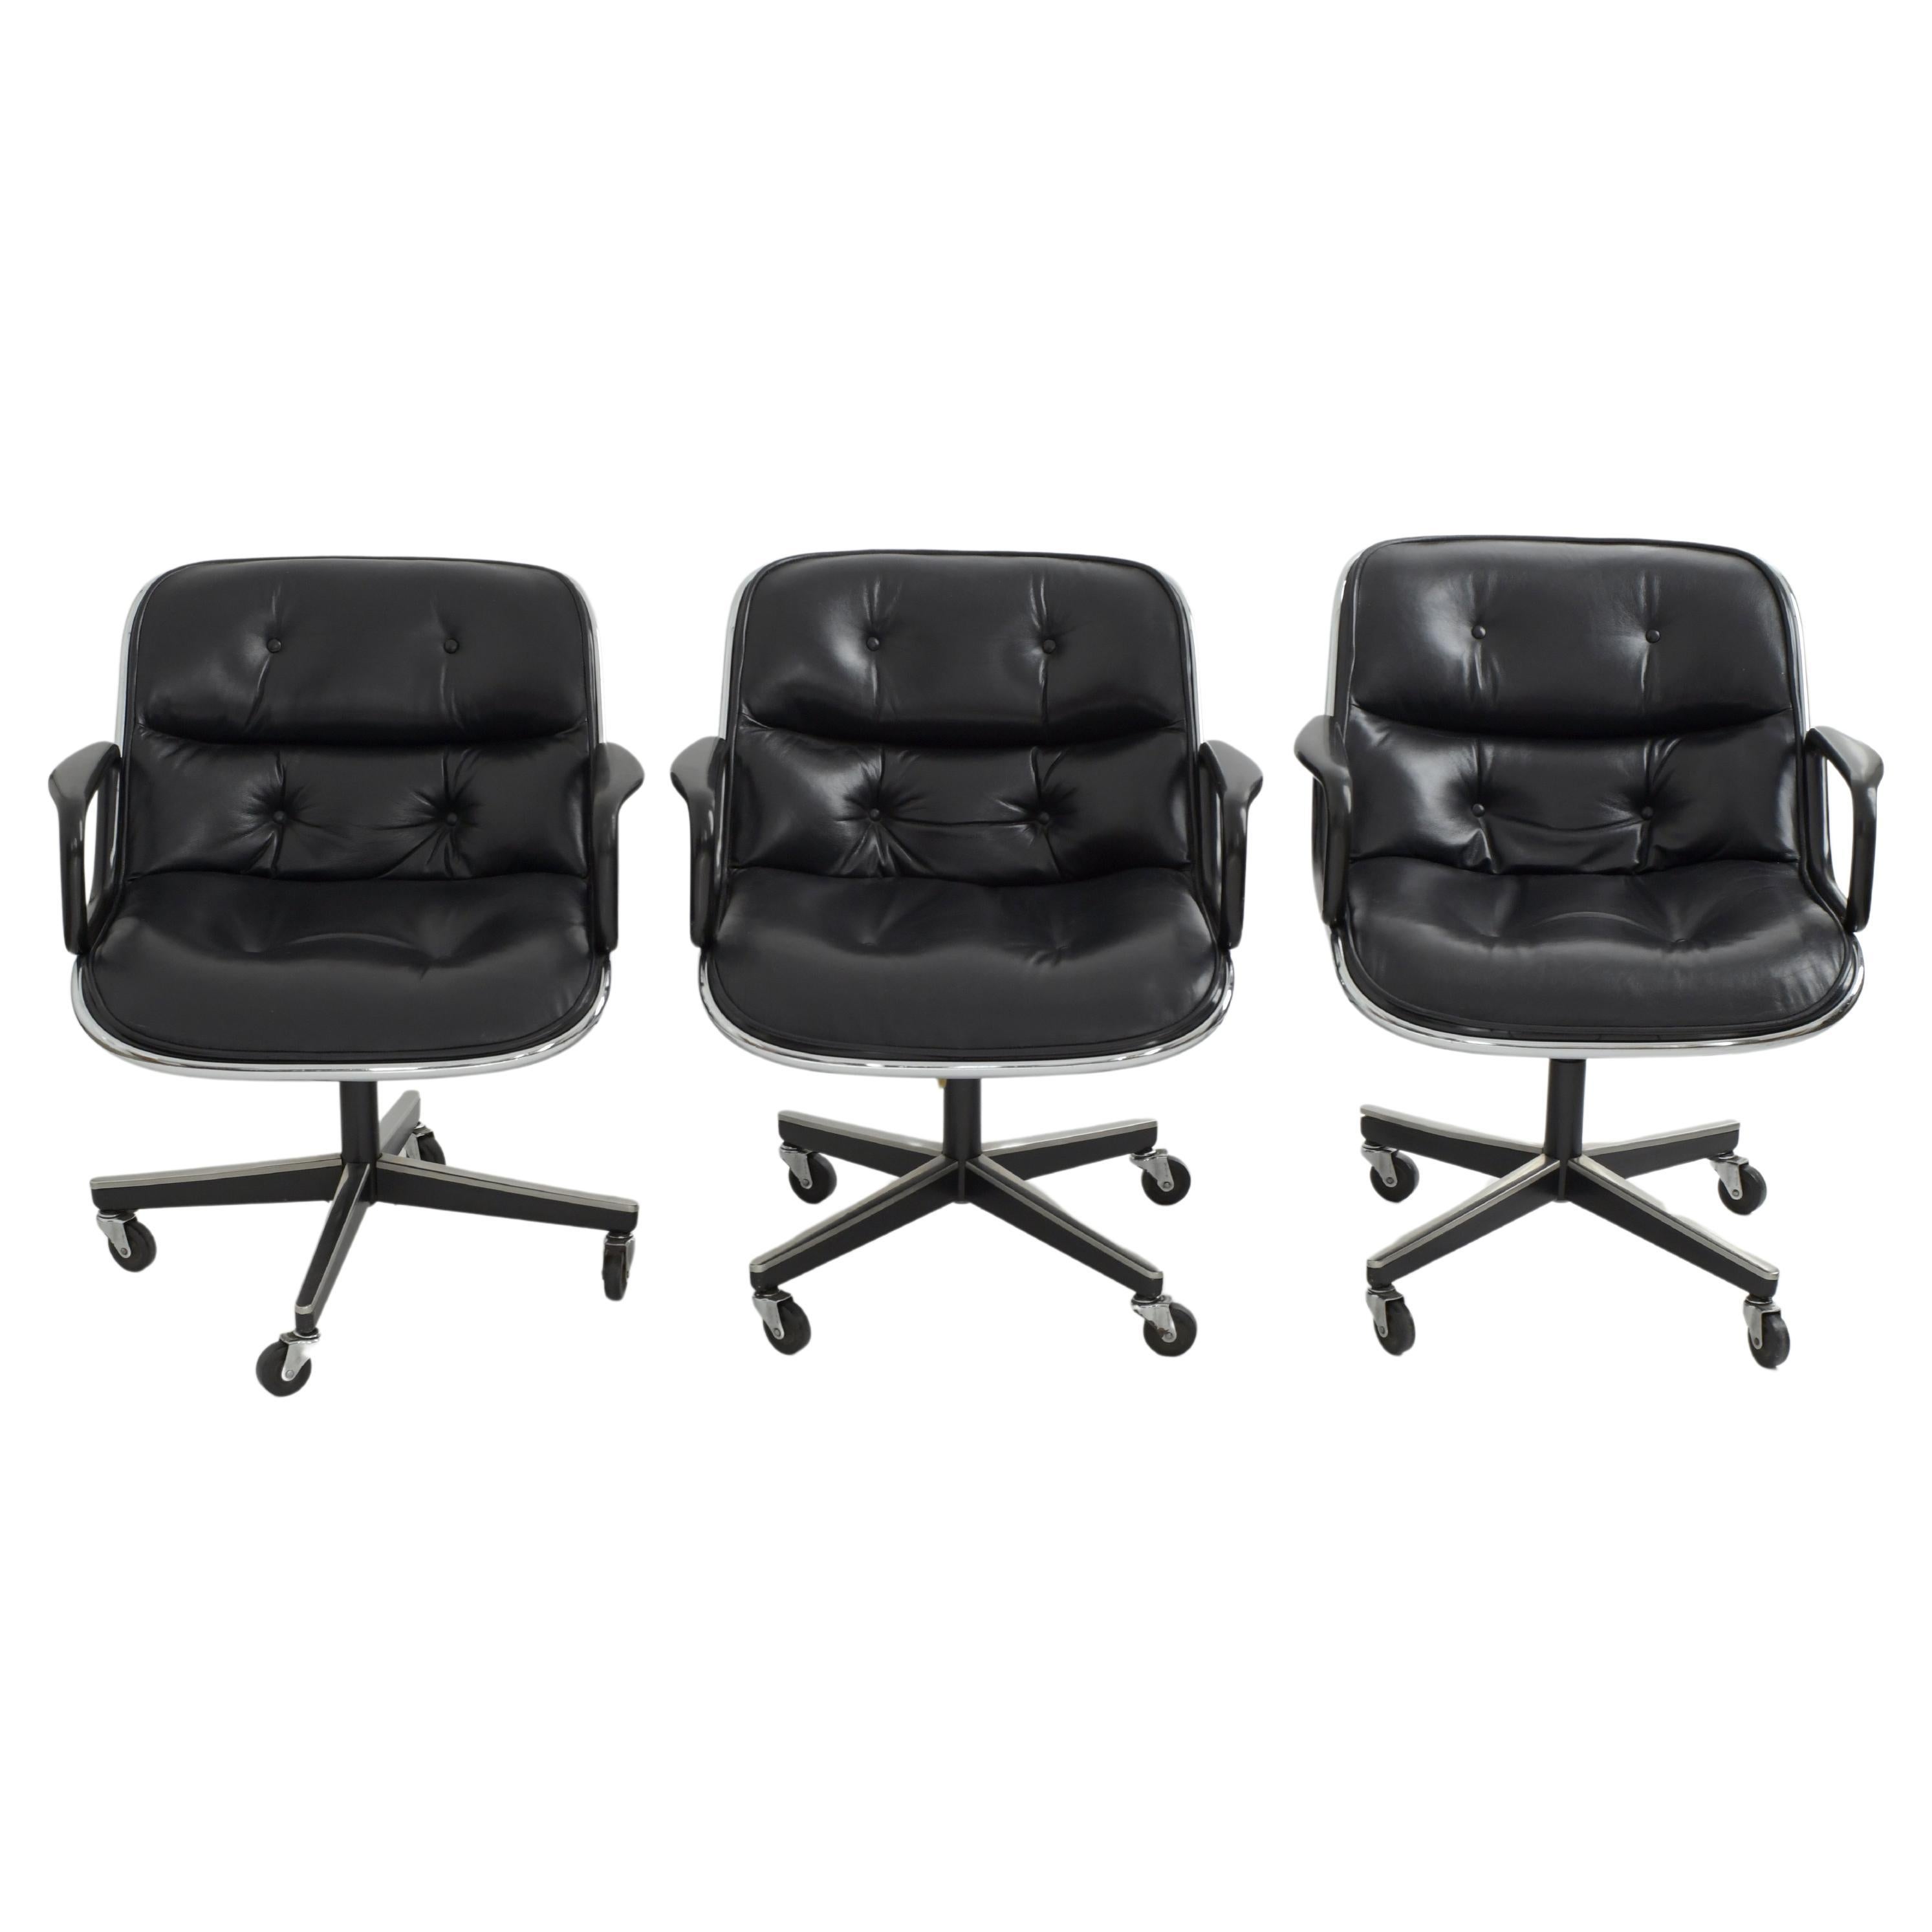 Charles Pollock Executive Chairs for Knoll 